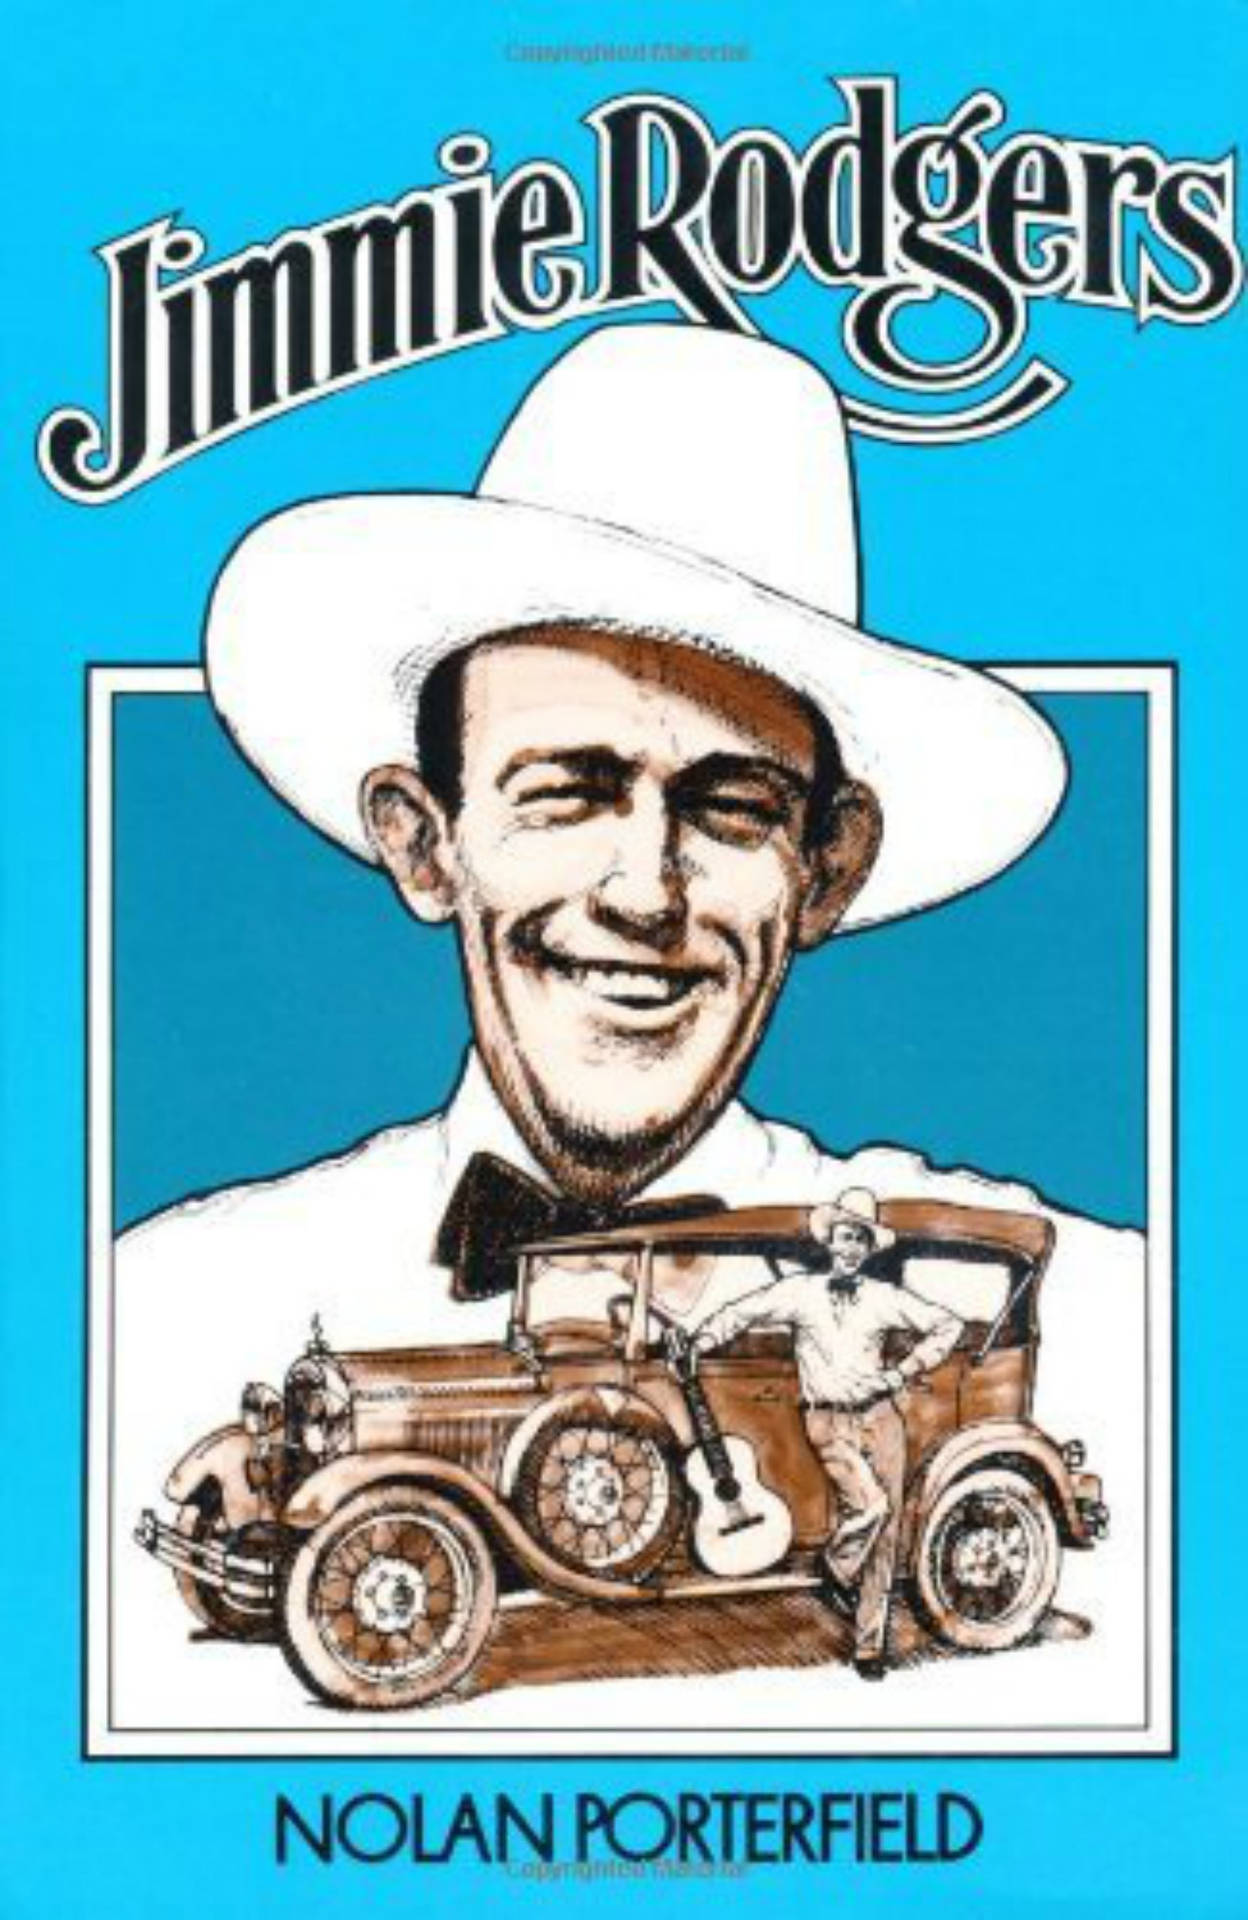 Jimmie Rodgers Album Cover Wallpaper